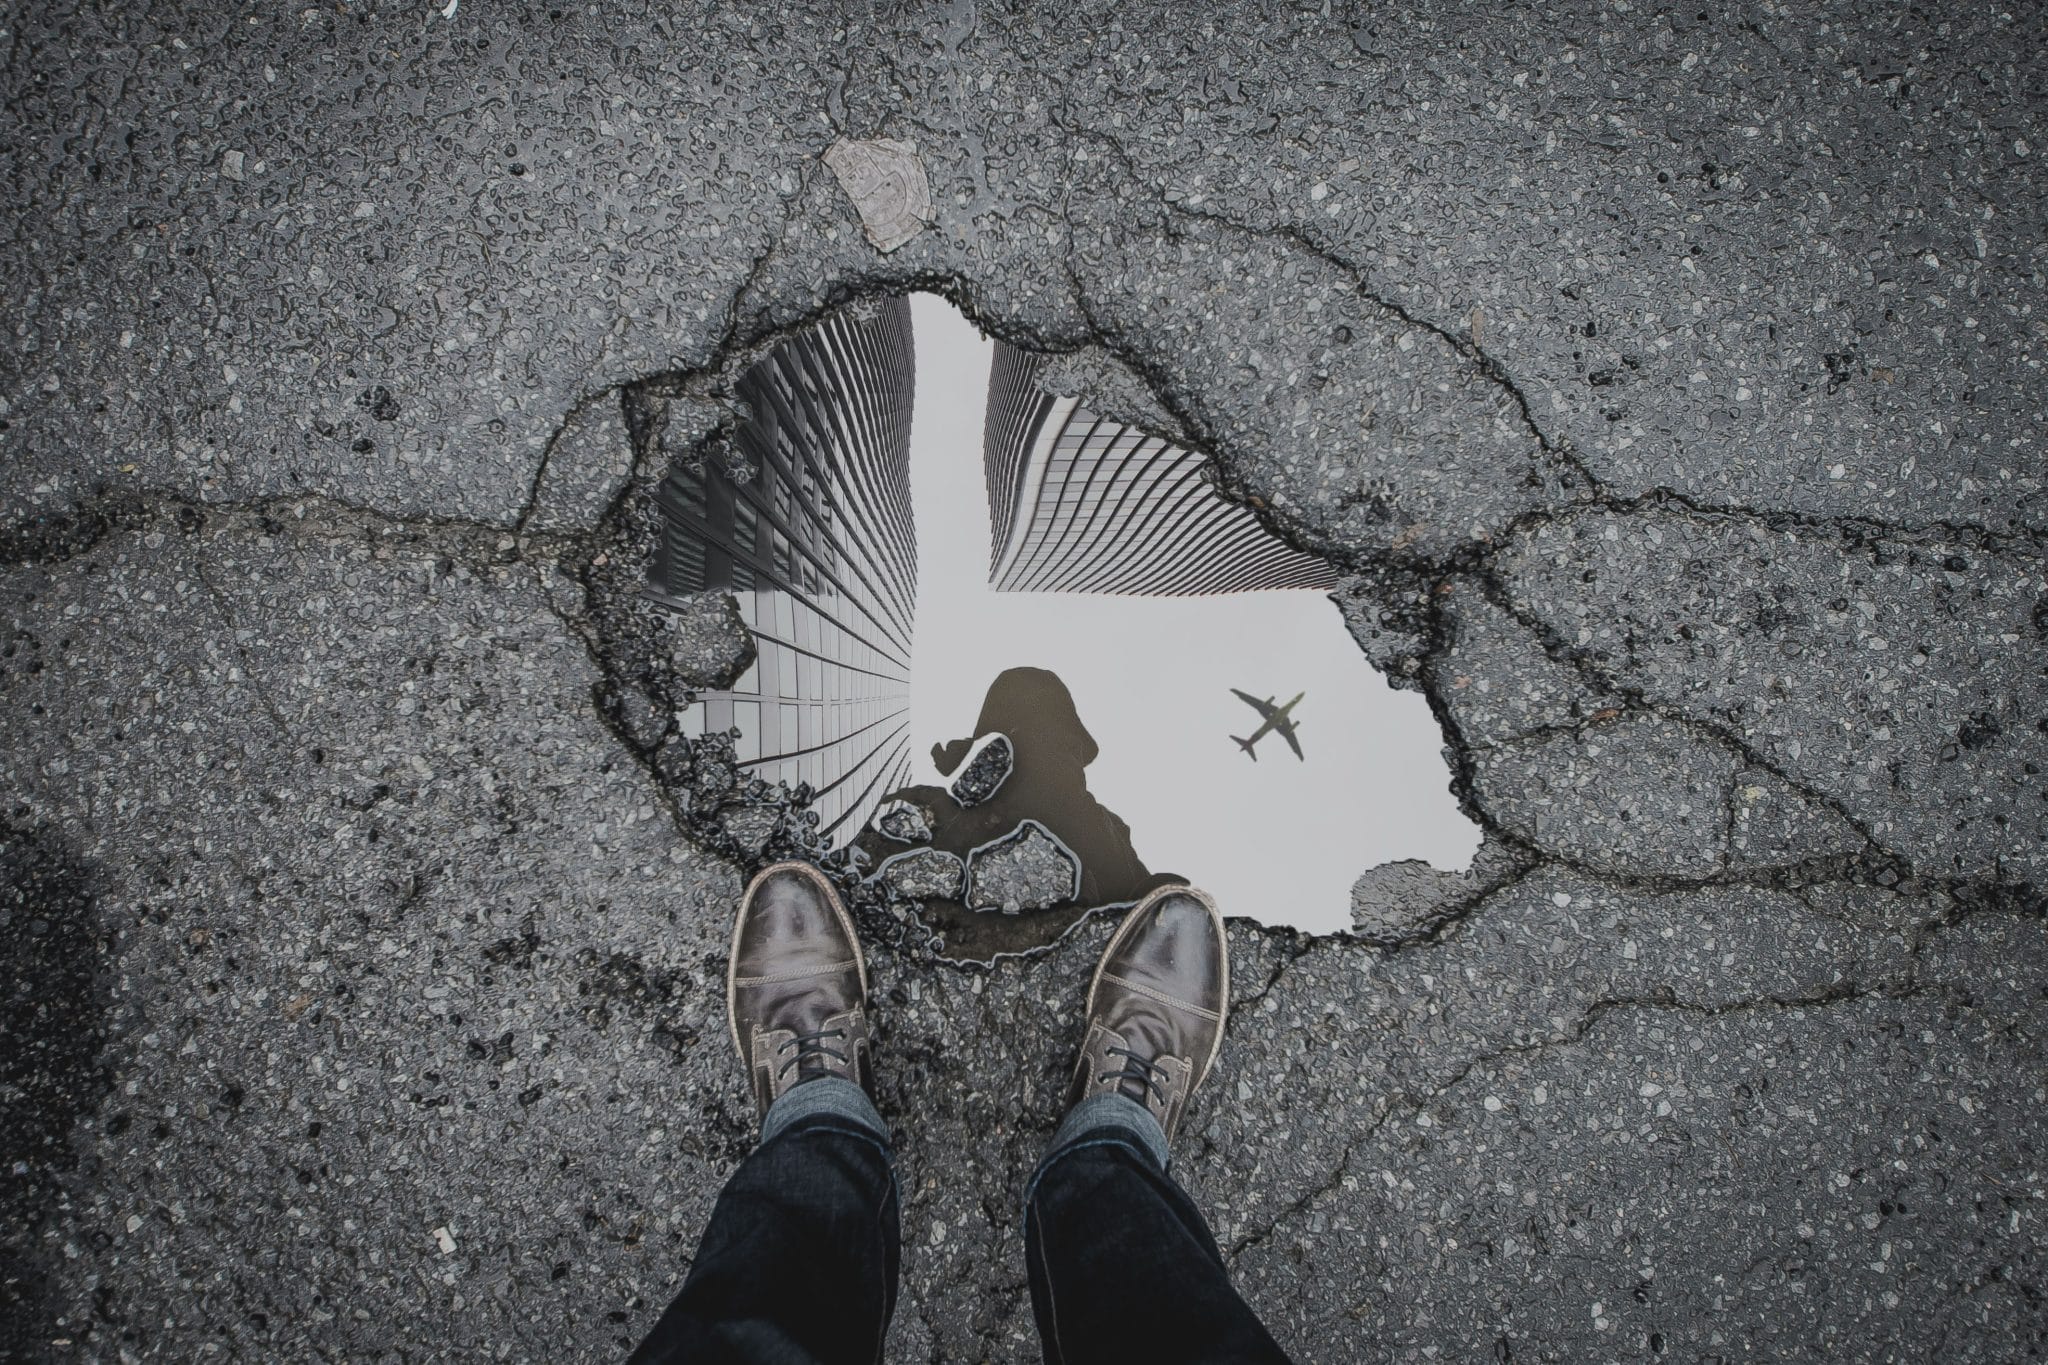 Person looks at their reflection in a puddle